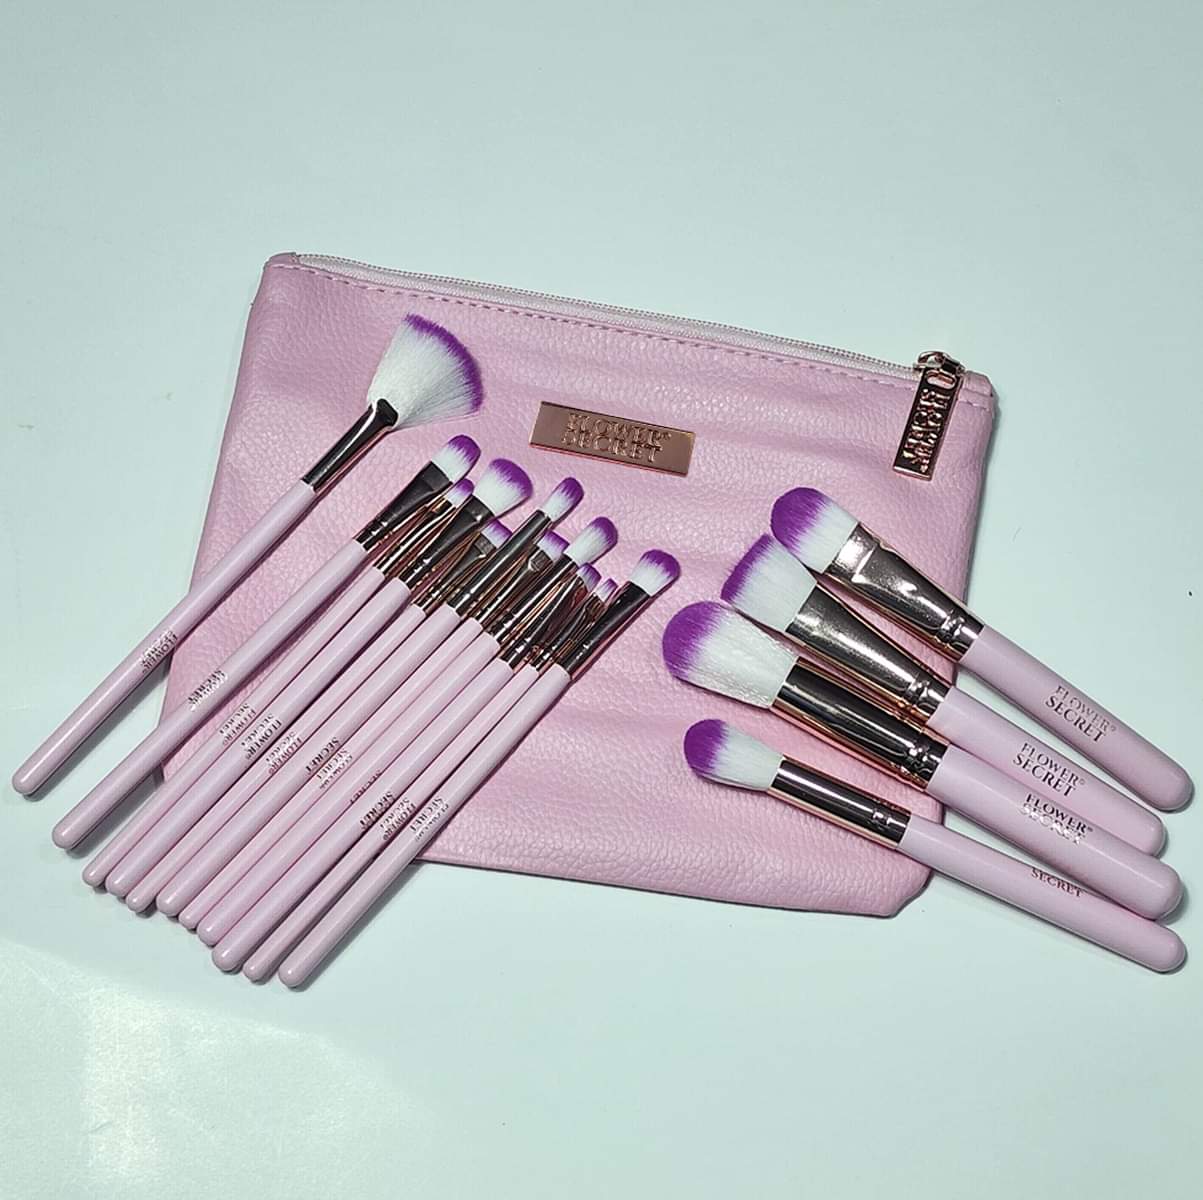 Set Of 15 Mini Travel Portable Soft Makeup Brushes Set, Makeup Brushes Set, Professional Makeup Brushes, Travel Cosmetic Brushes Set with Bag, Blending Complete Brushes & Kits